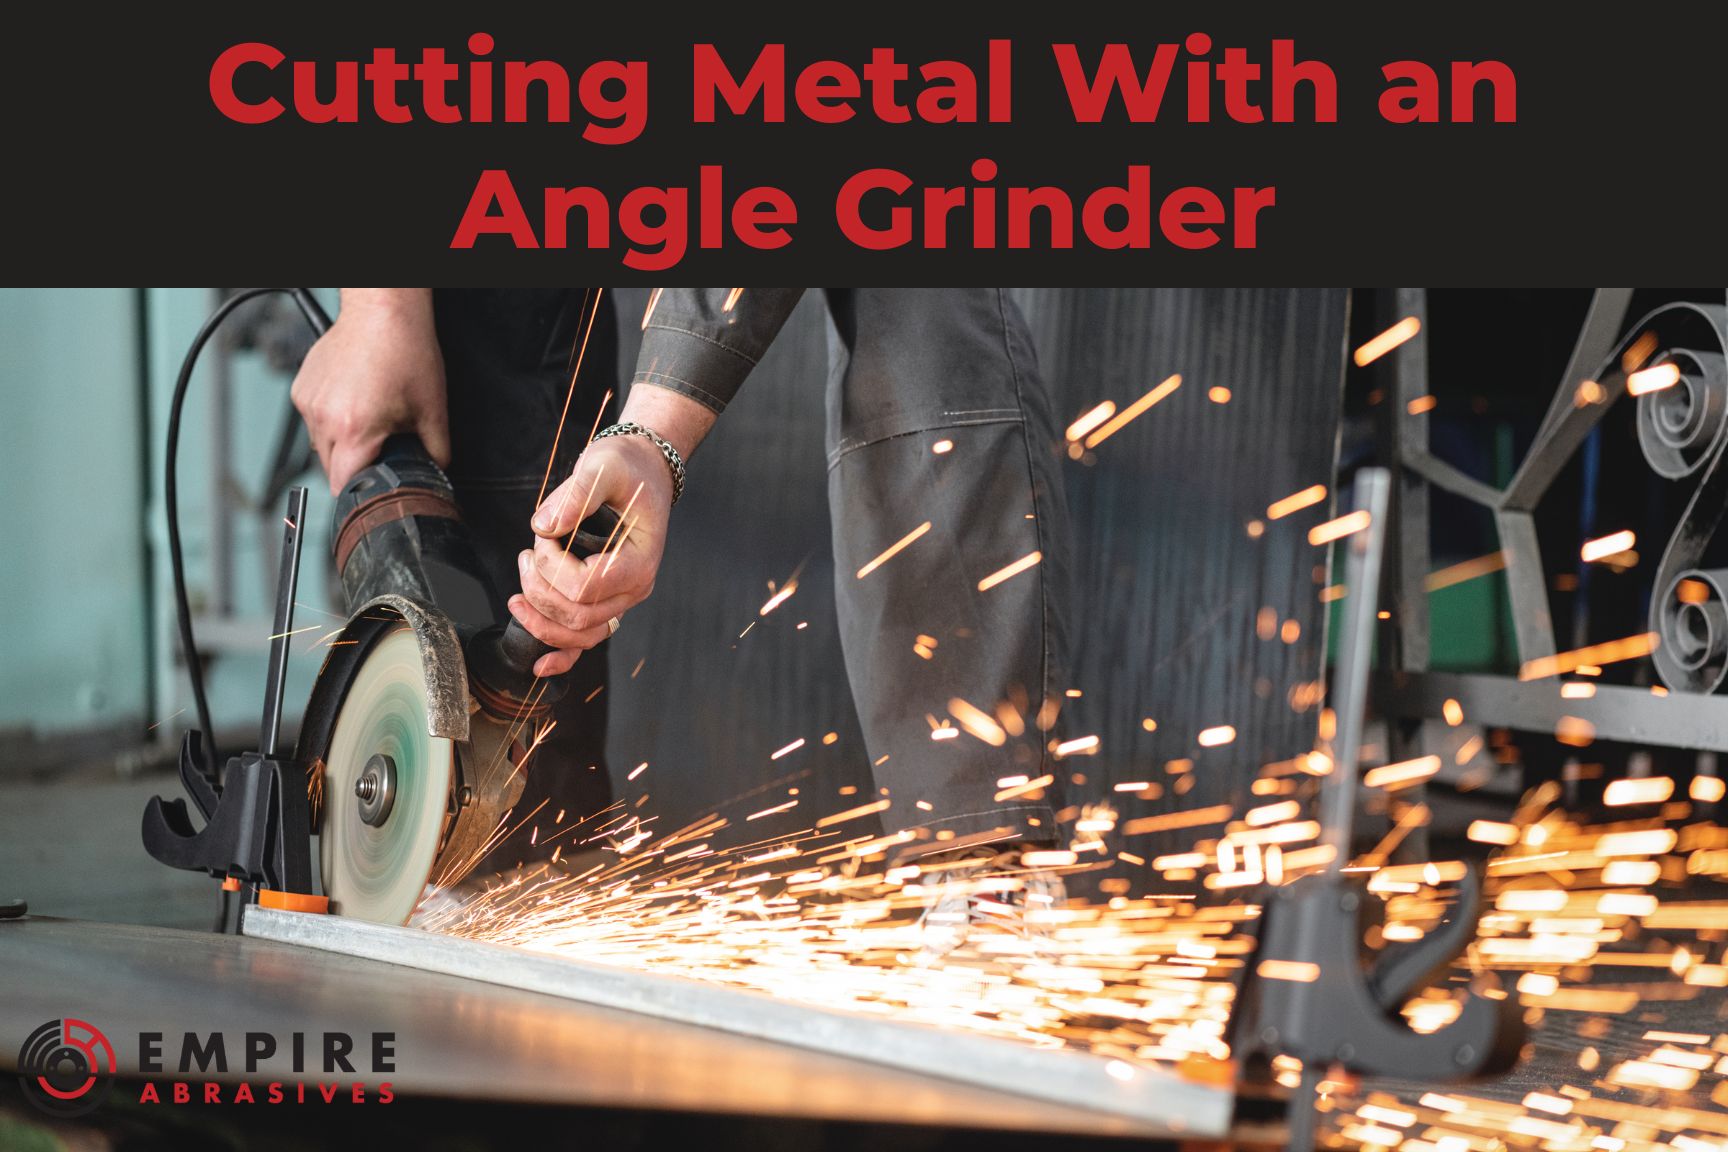 https://www.empireabrasives.com/product_images/uploaded_images/cutting-metal-with-angle-grinder-how-to-blog-post.jpg